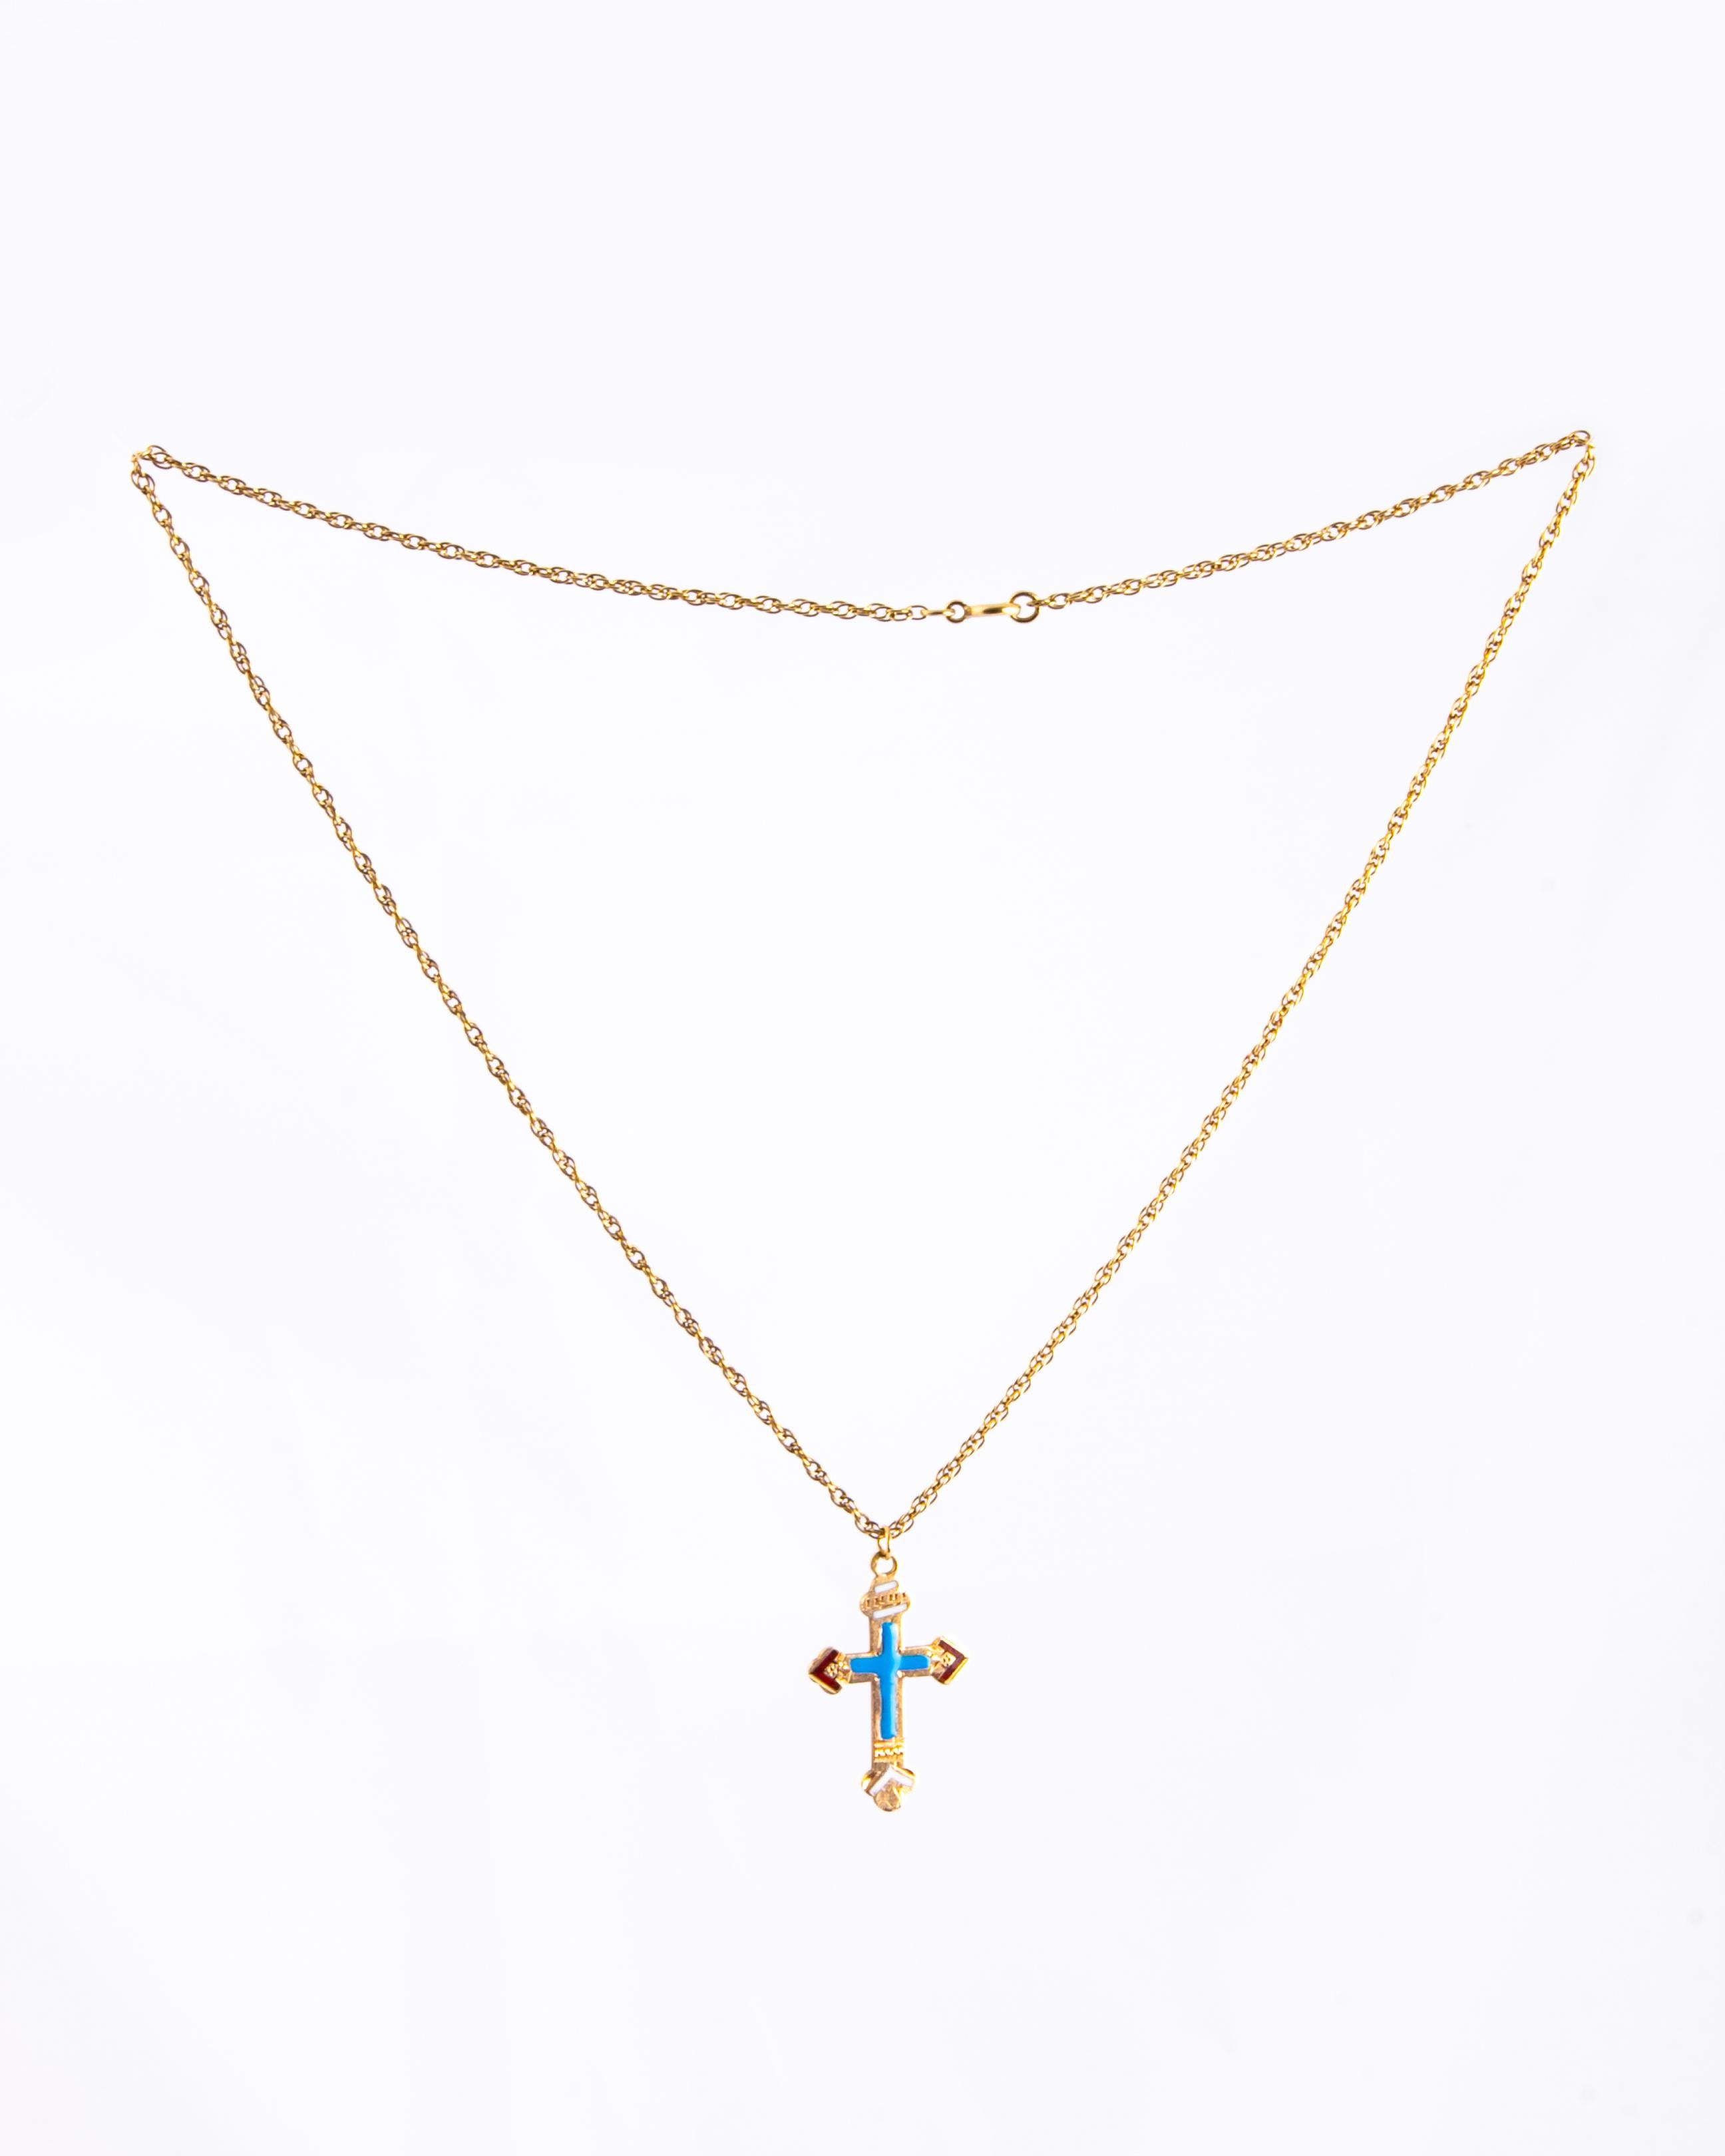 This gorgeous cross necklace is an imperial Russian cross pendant which is stamped with gold 56 mark. The cross holds enamel and engraving. 

Length: 46cm 
Cross Dimensions: 28x19mm
Chain Width: 1mm

Weight: 5.55g